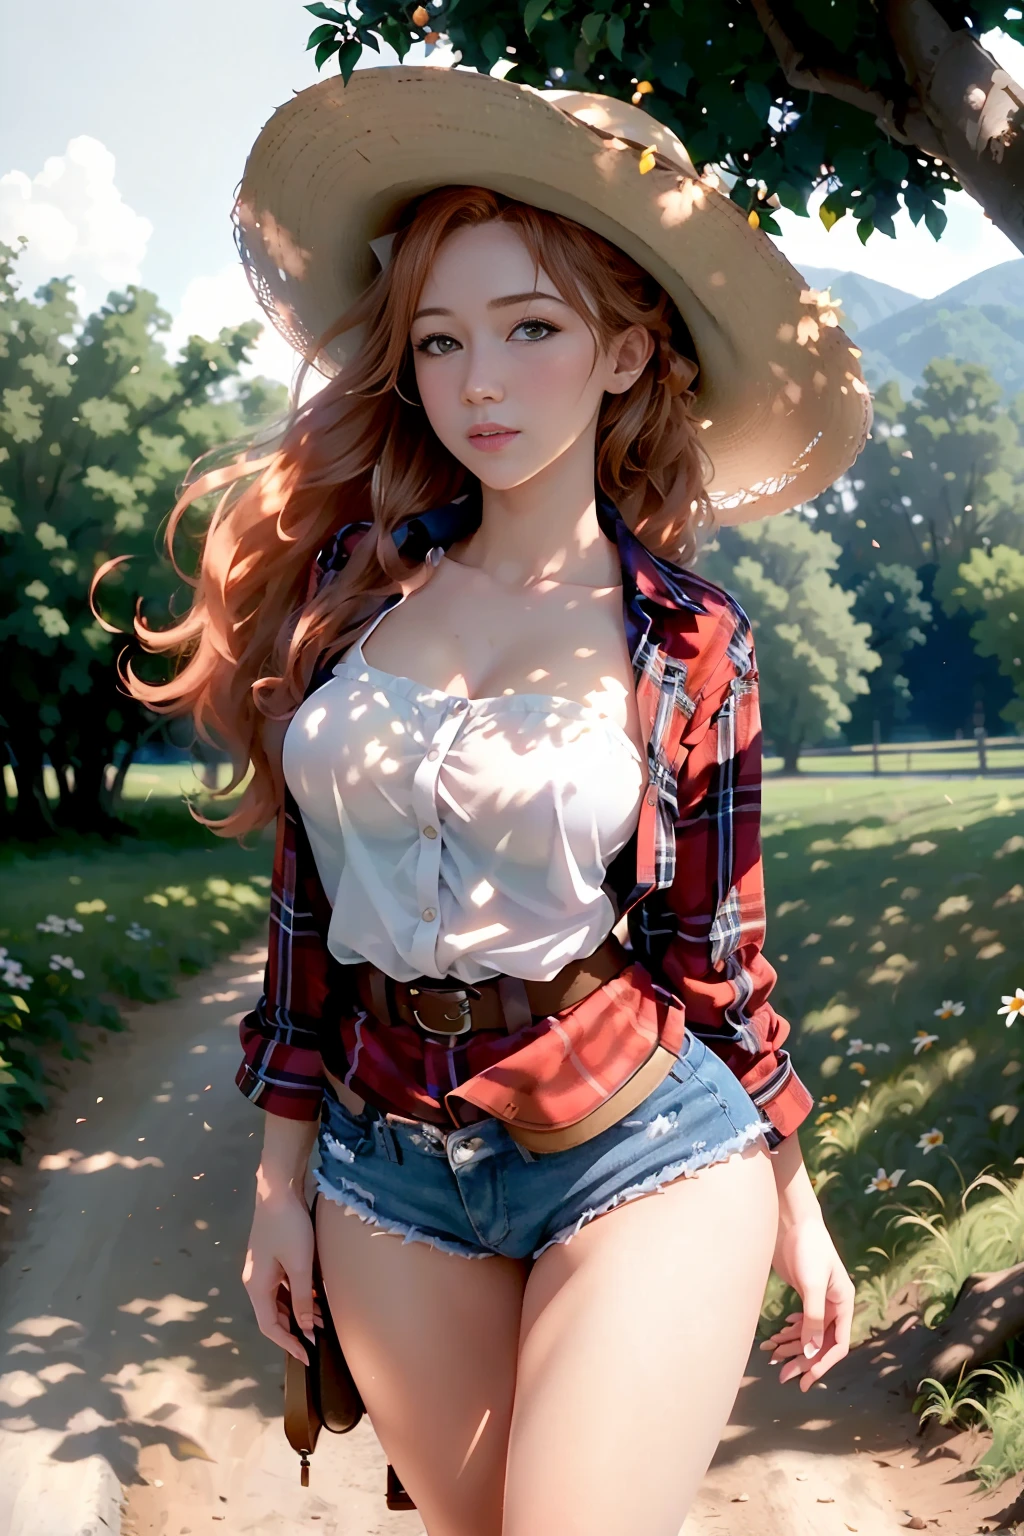 masterpiece, highest quality, colorful cinematic lighting, portrait photograph of  female peach farmer with overflowing [orange|yellow] hair, wearing tight red checkered flannel shirt, daisy dukes, ornate leather cowboy boots, (wearing cowboy hat), (perfect face:1.1), standing under a peach tree in rolling pasture, sunset in the background, dappled light, romantic, HDR, highly detailed, hasselblad, 8k, hyper realistic, eye level shot, f1.4 aperture, 8mm film grain, cinestill 800